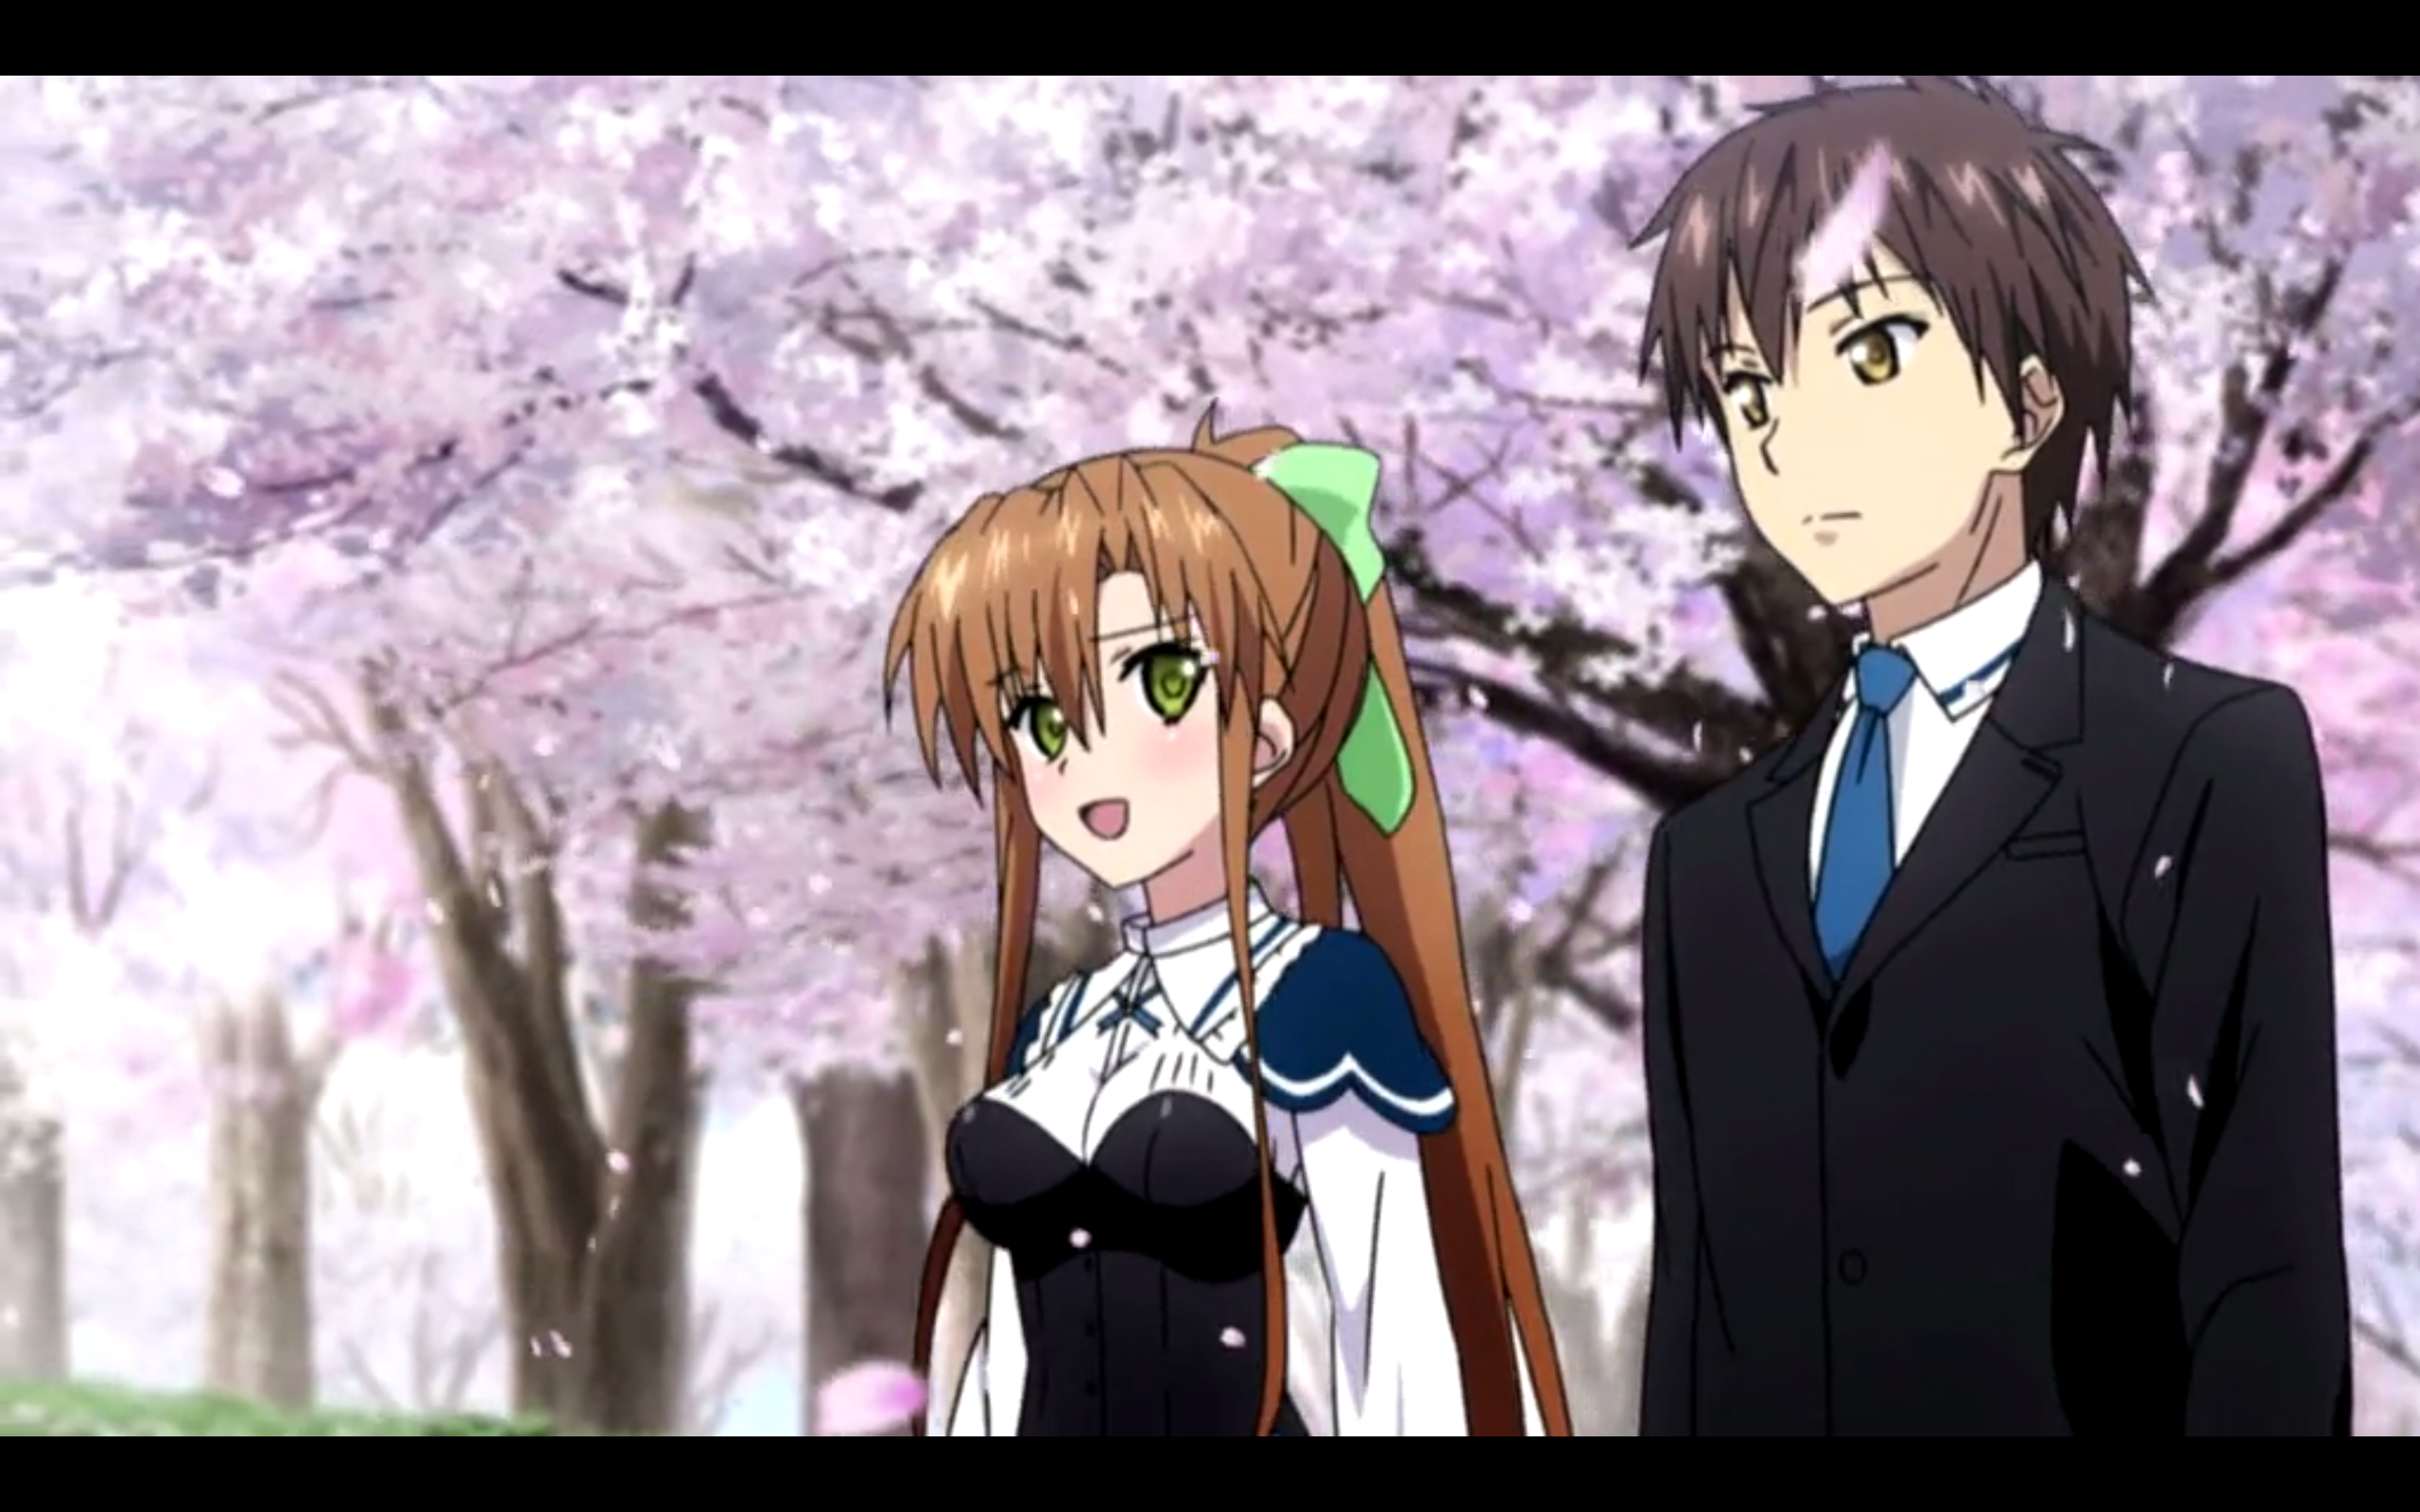 Review: Absolute Duo  The Tiny World of an Anime Amateur